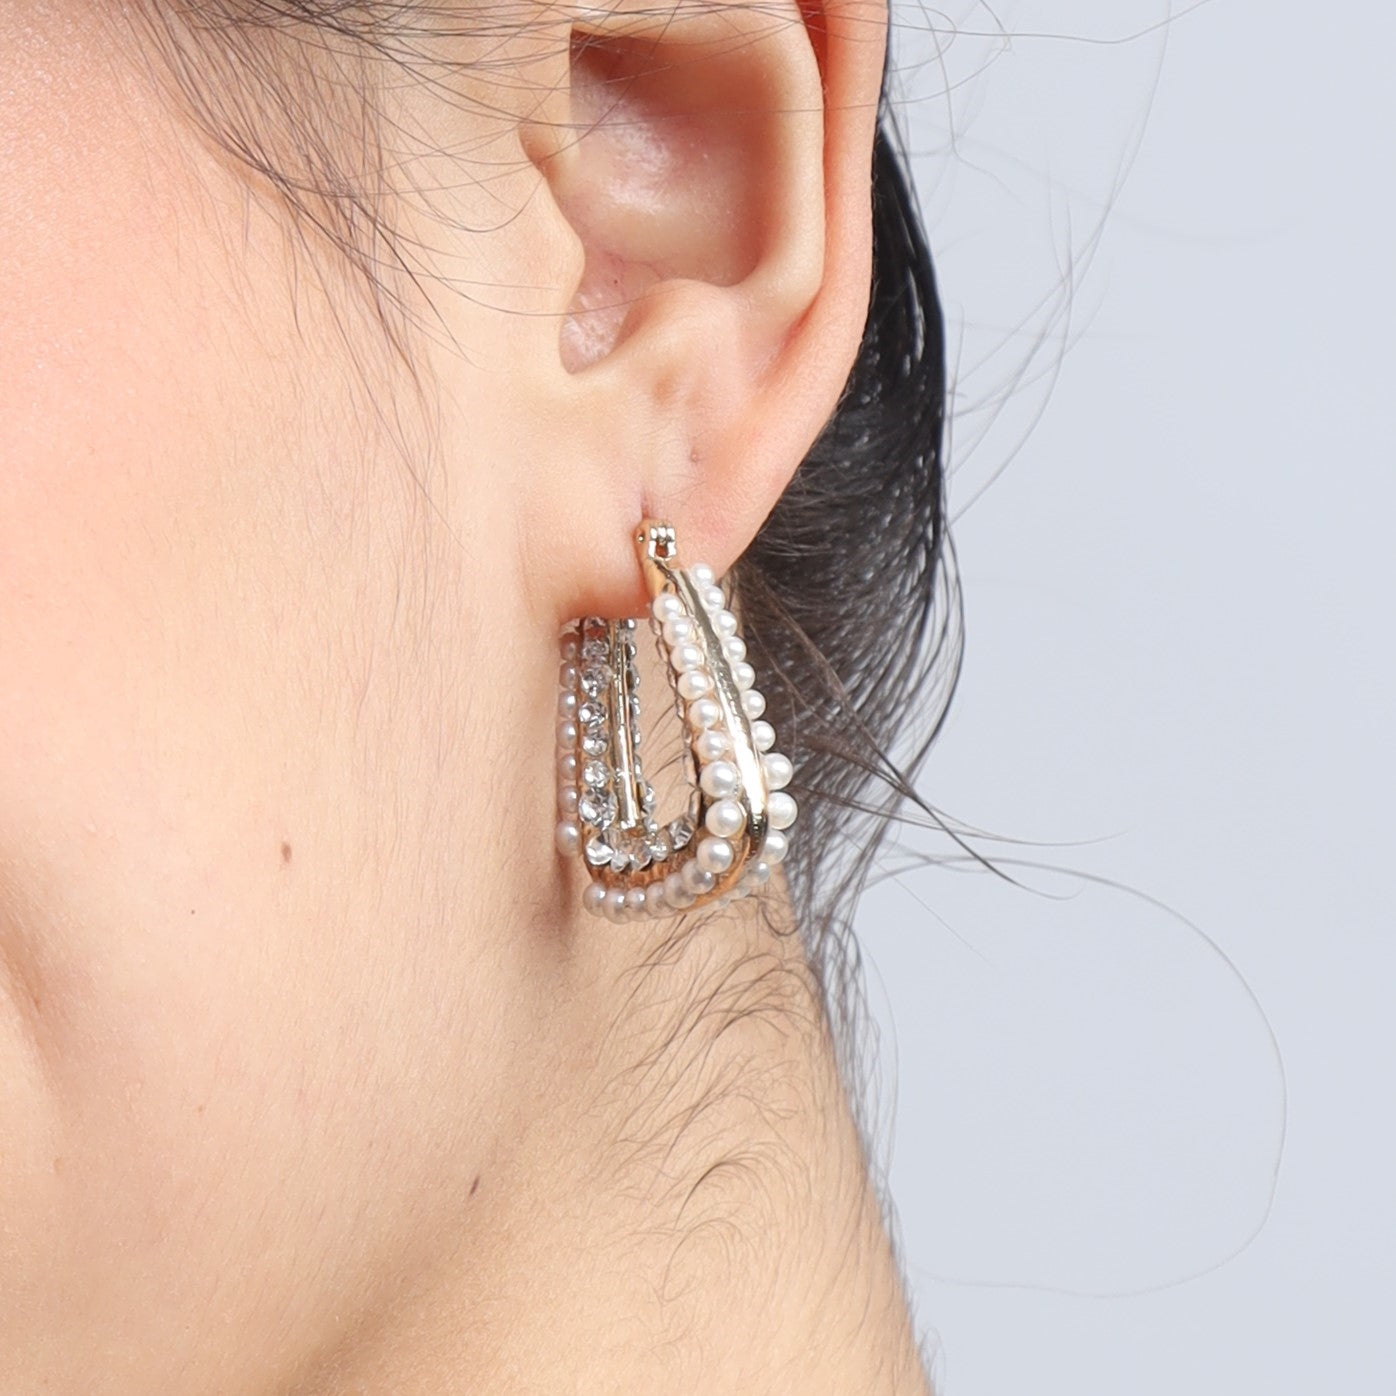 TFC Edgy Blingy Gold Plated Hoop Earrings